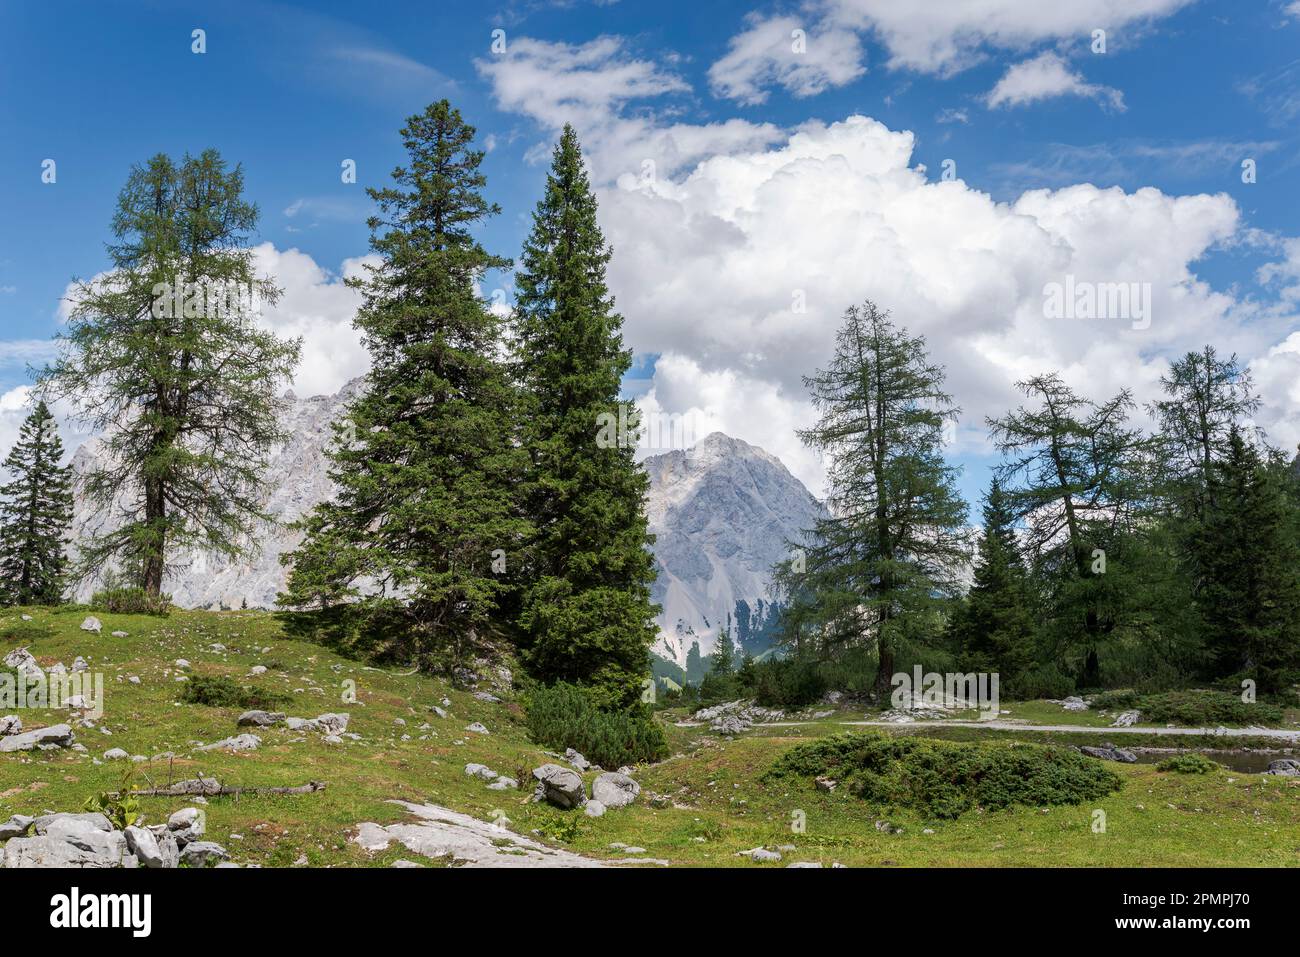 Meadows and forest of Norway spruce, Picea abies, in the Mieming Range, State of Tyrol, Austria Stock Photo